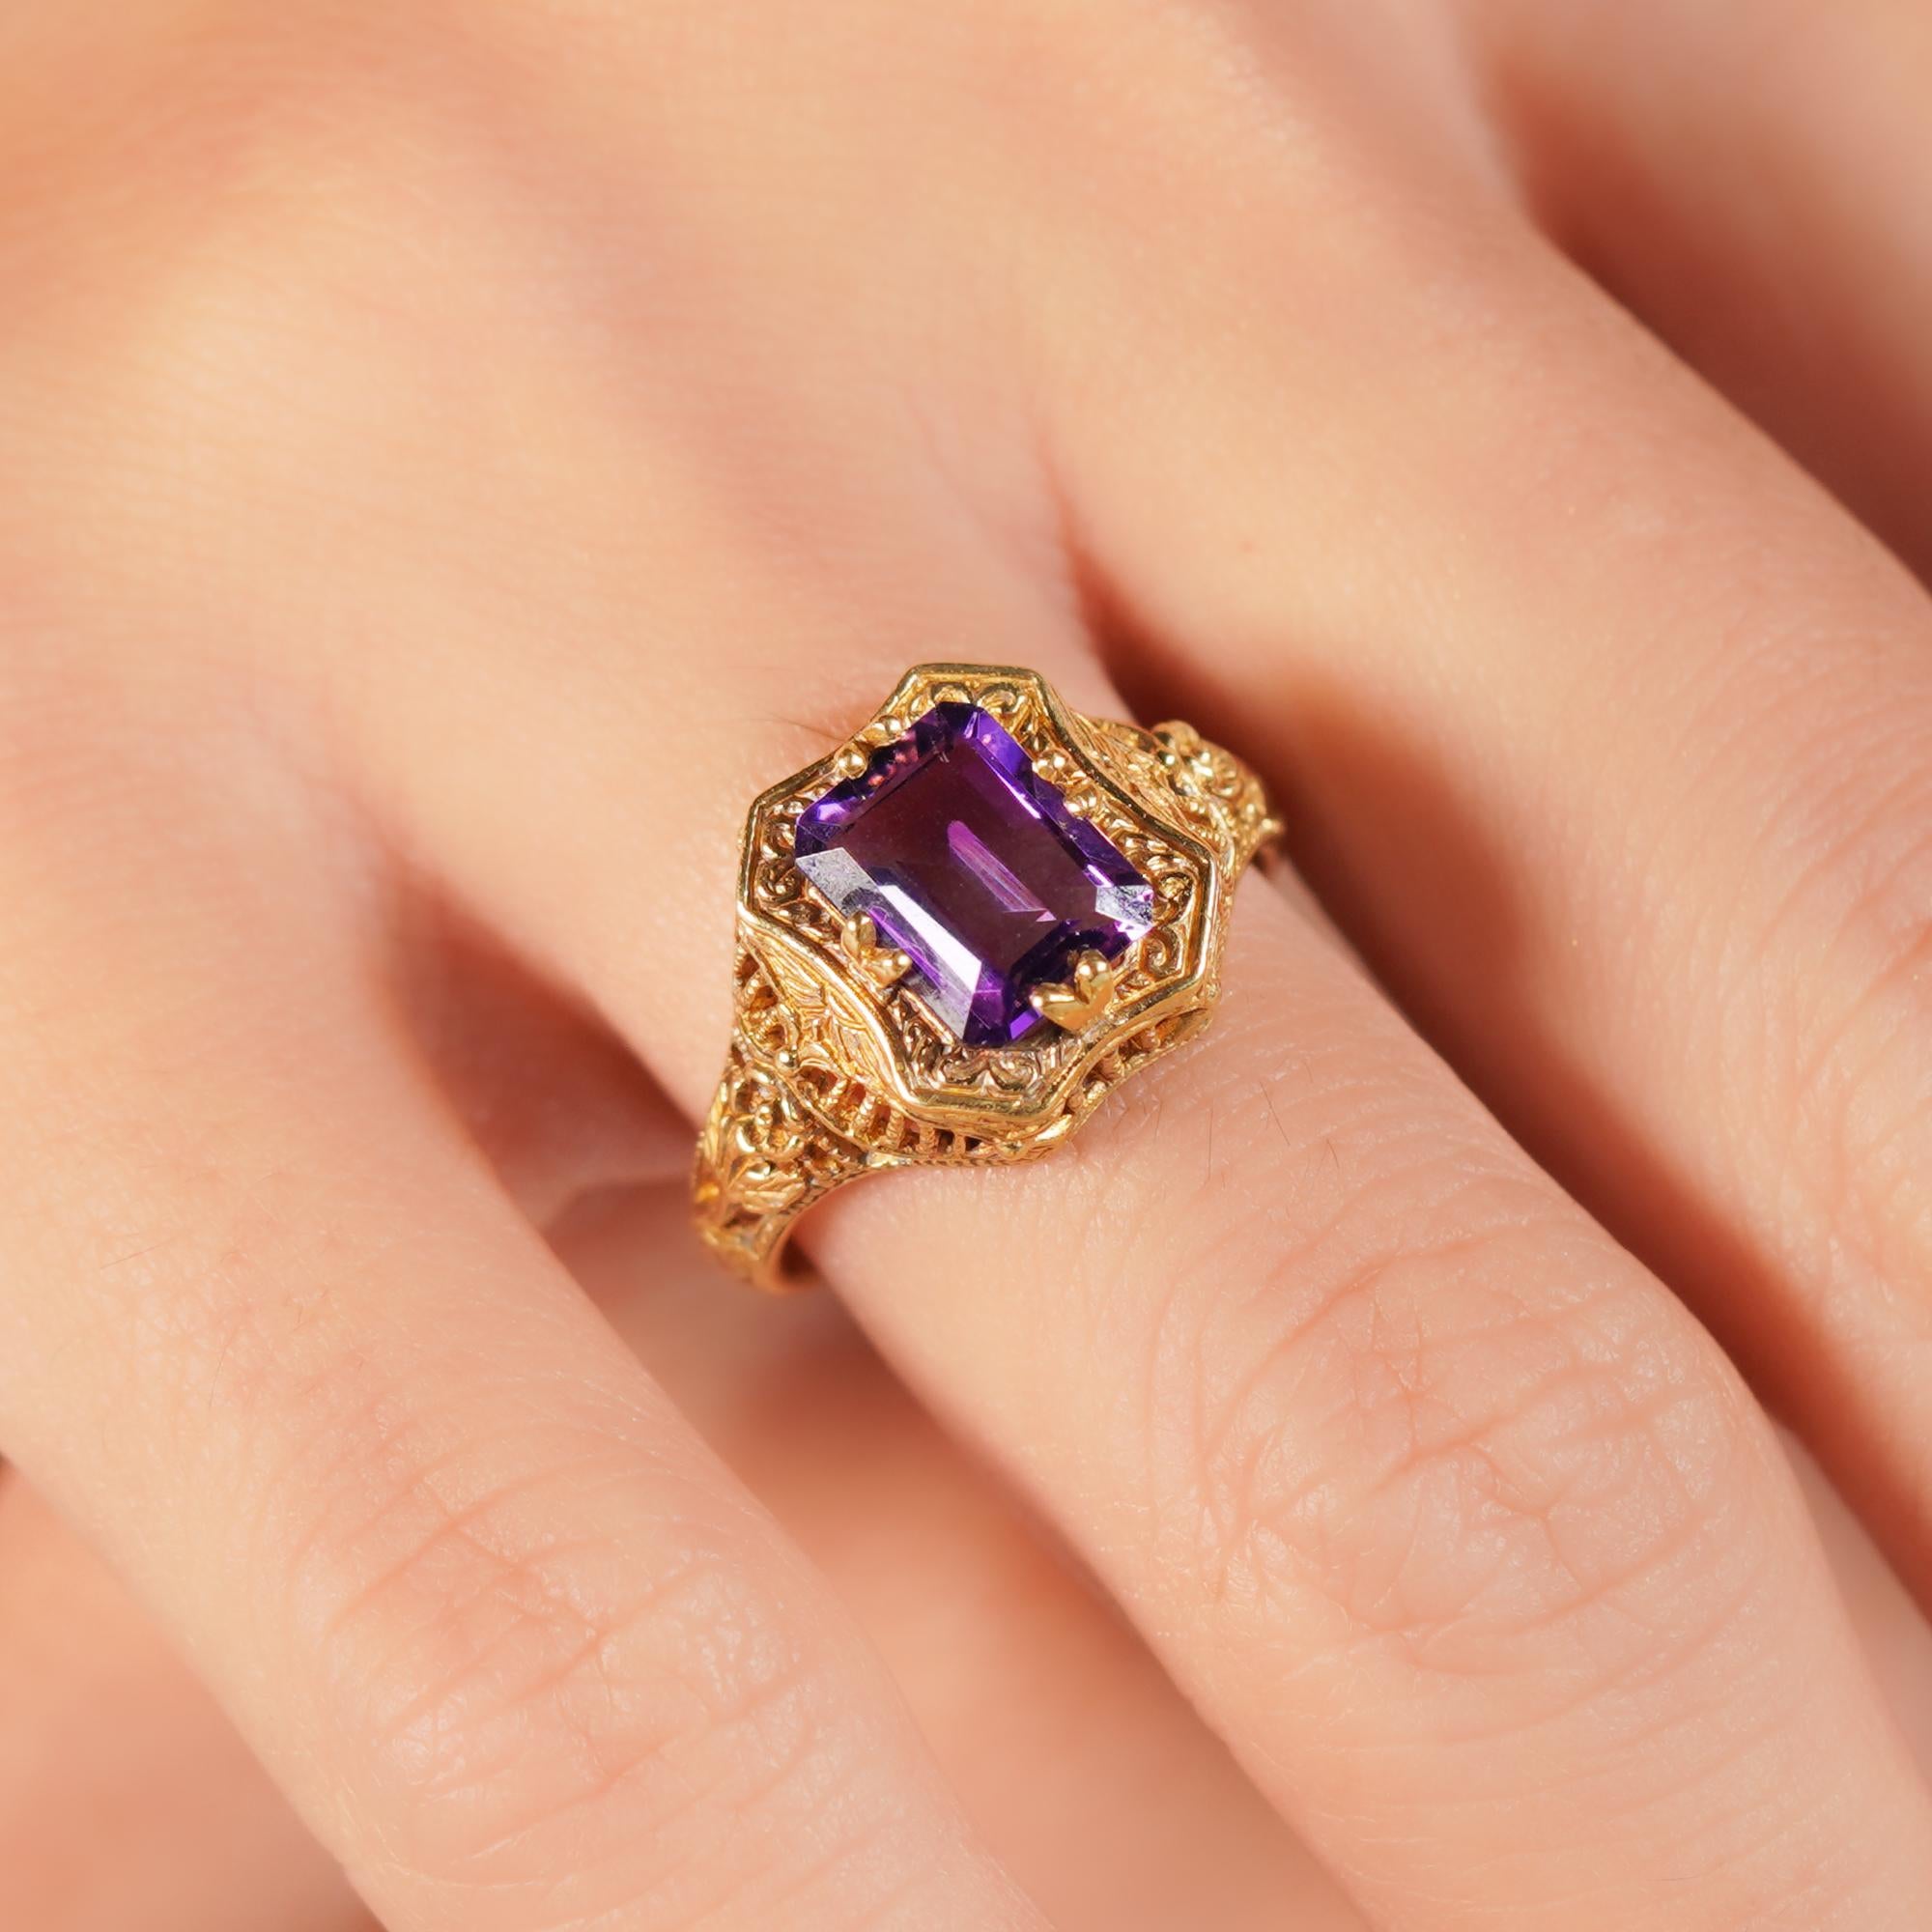 For Sale:  Natural Emerald Cut Amethyst Vintage Style Filigree Ring in Solid 9K Yellow Gold 9